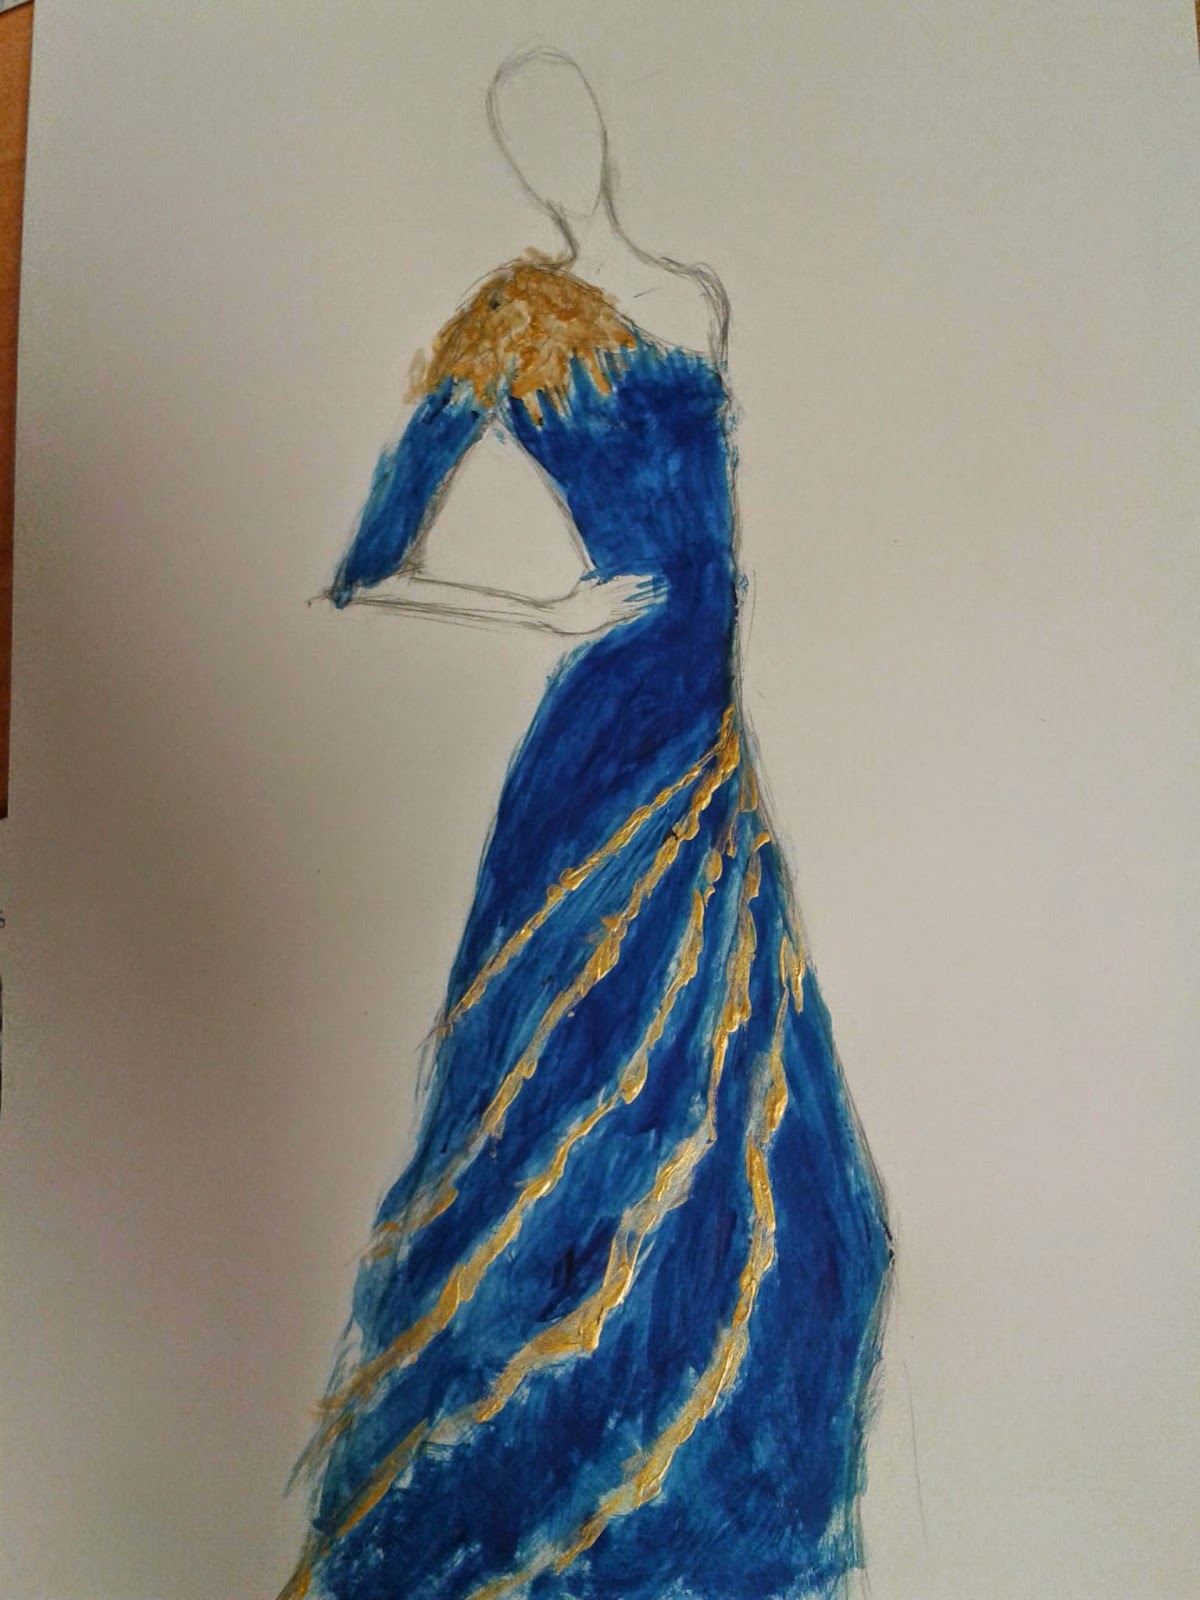 fashion&art/photography: Gold and blue dress design